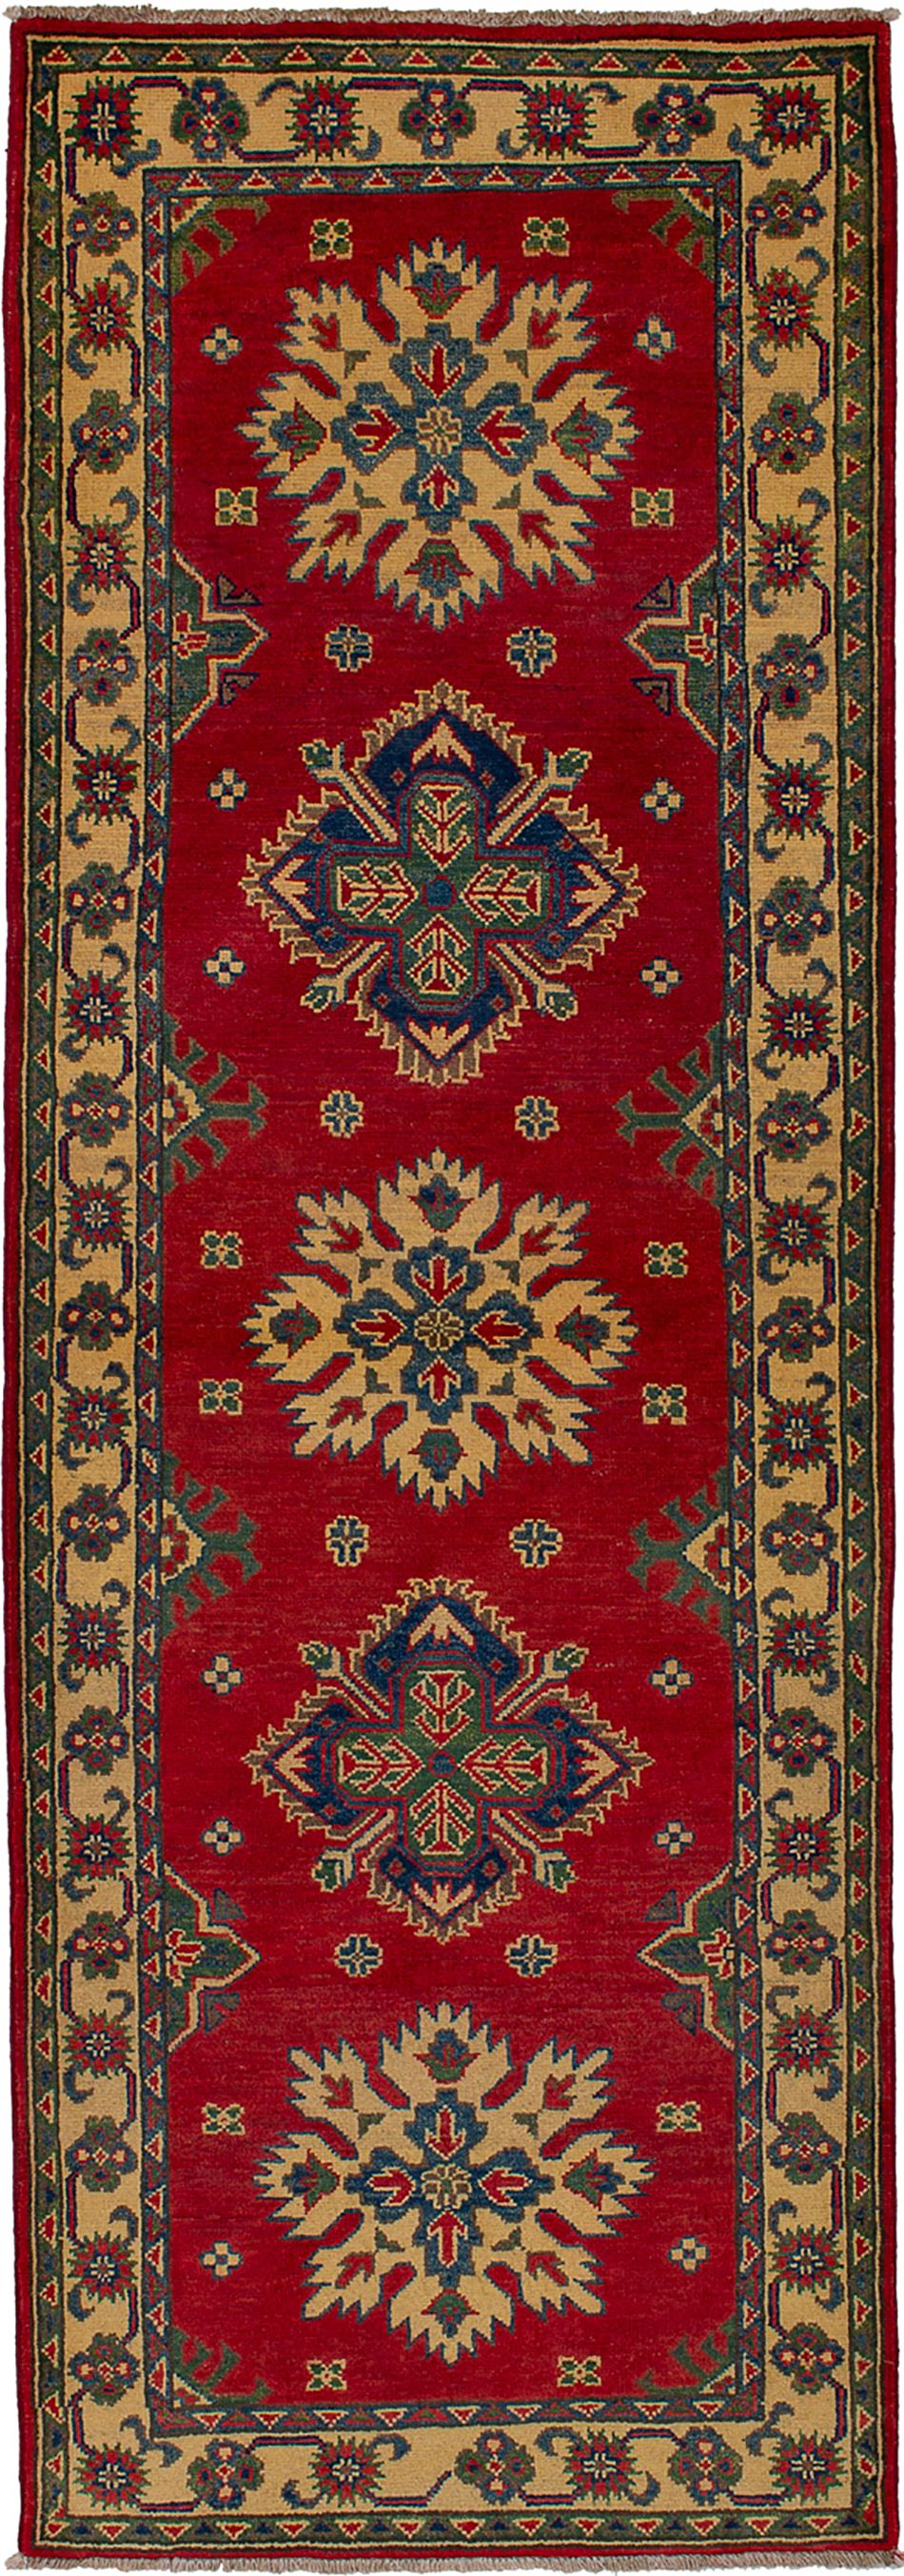 Hand-knotted Finest Gazni Red Wool Rug 2'9" x 8'4" Size: 2'9" x 8'4"  